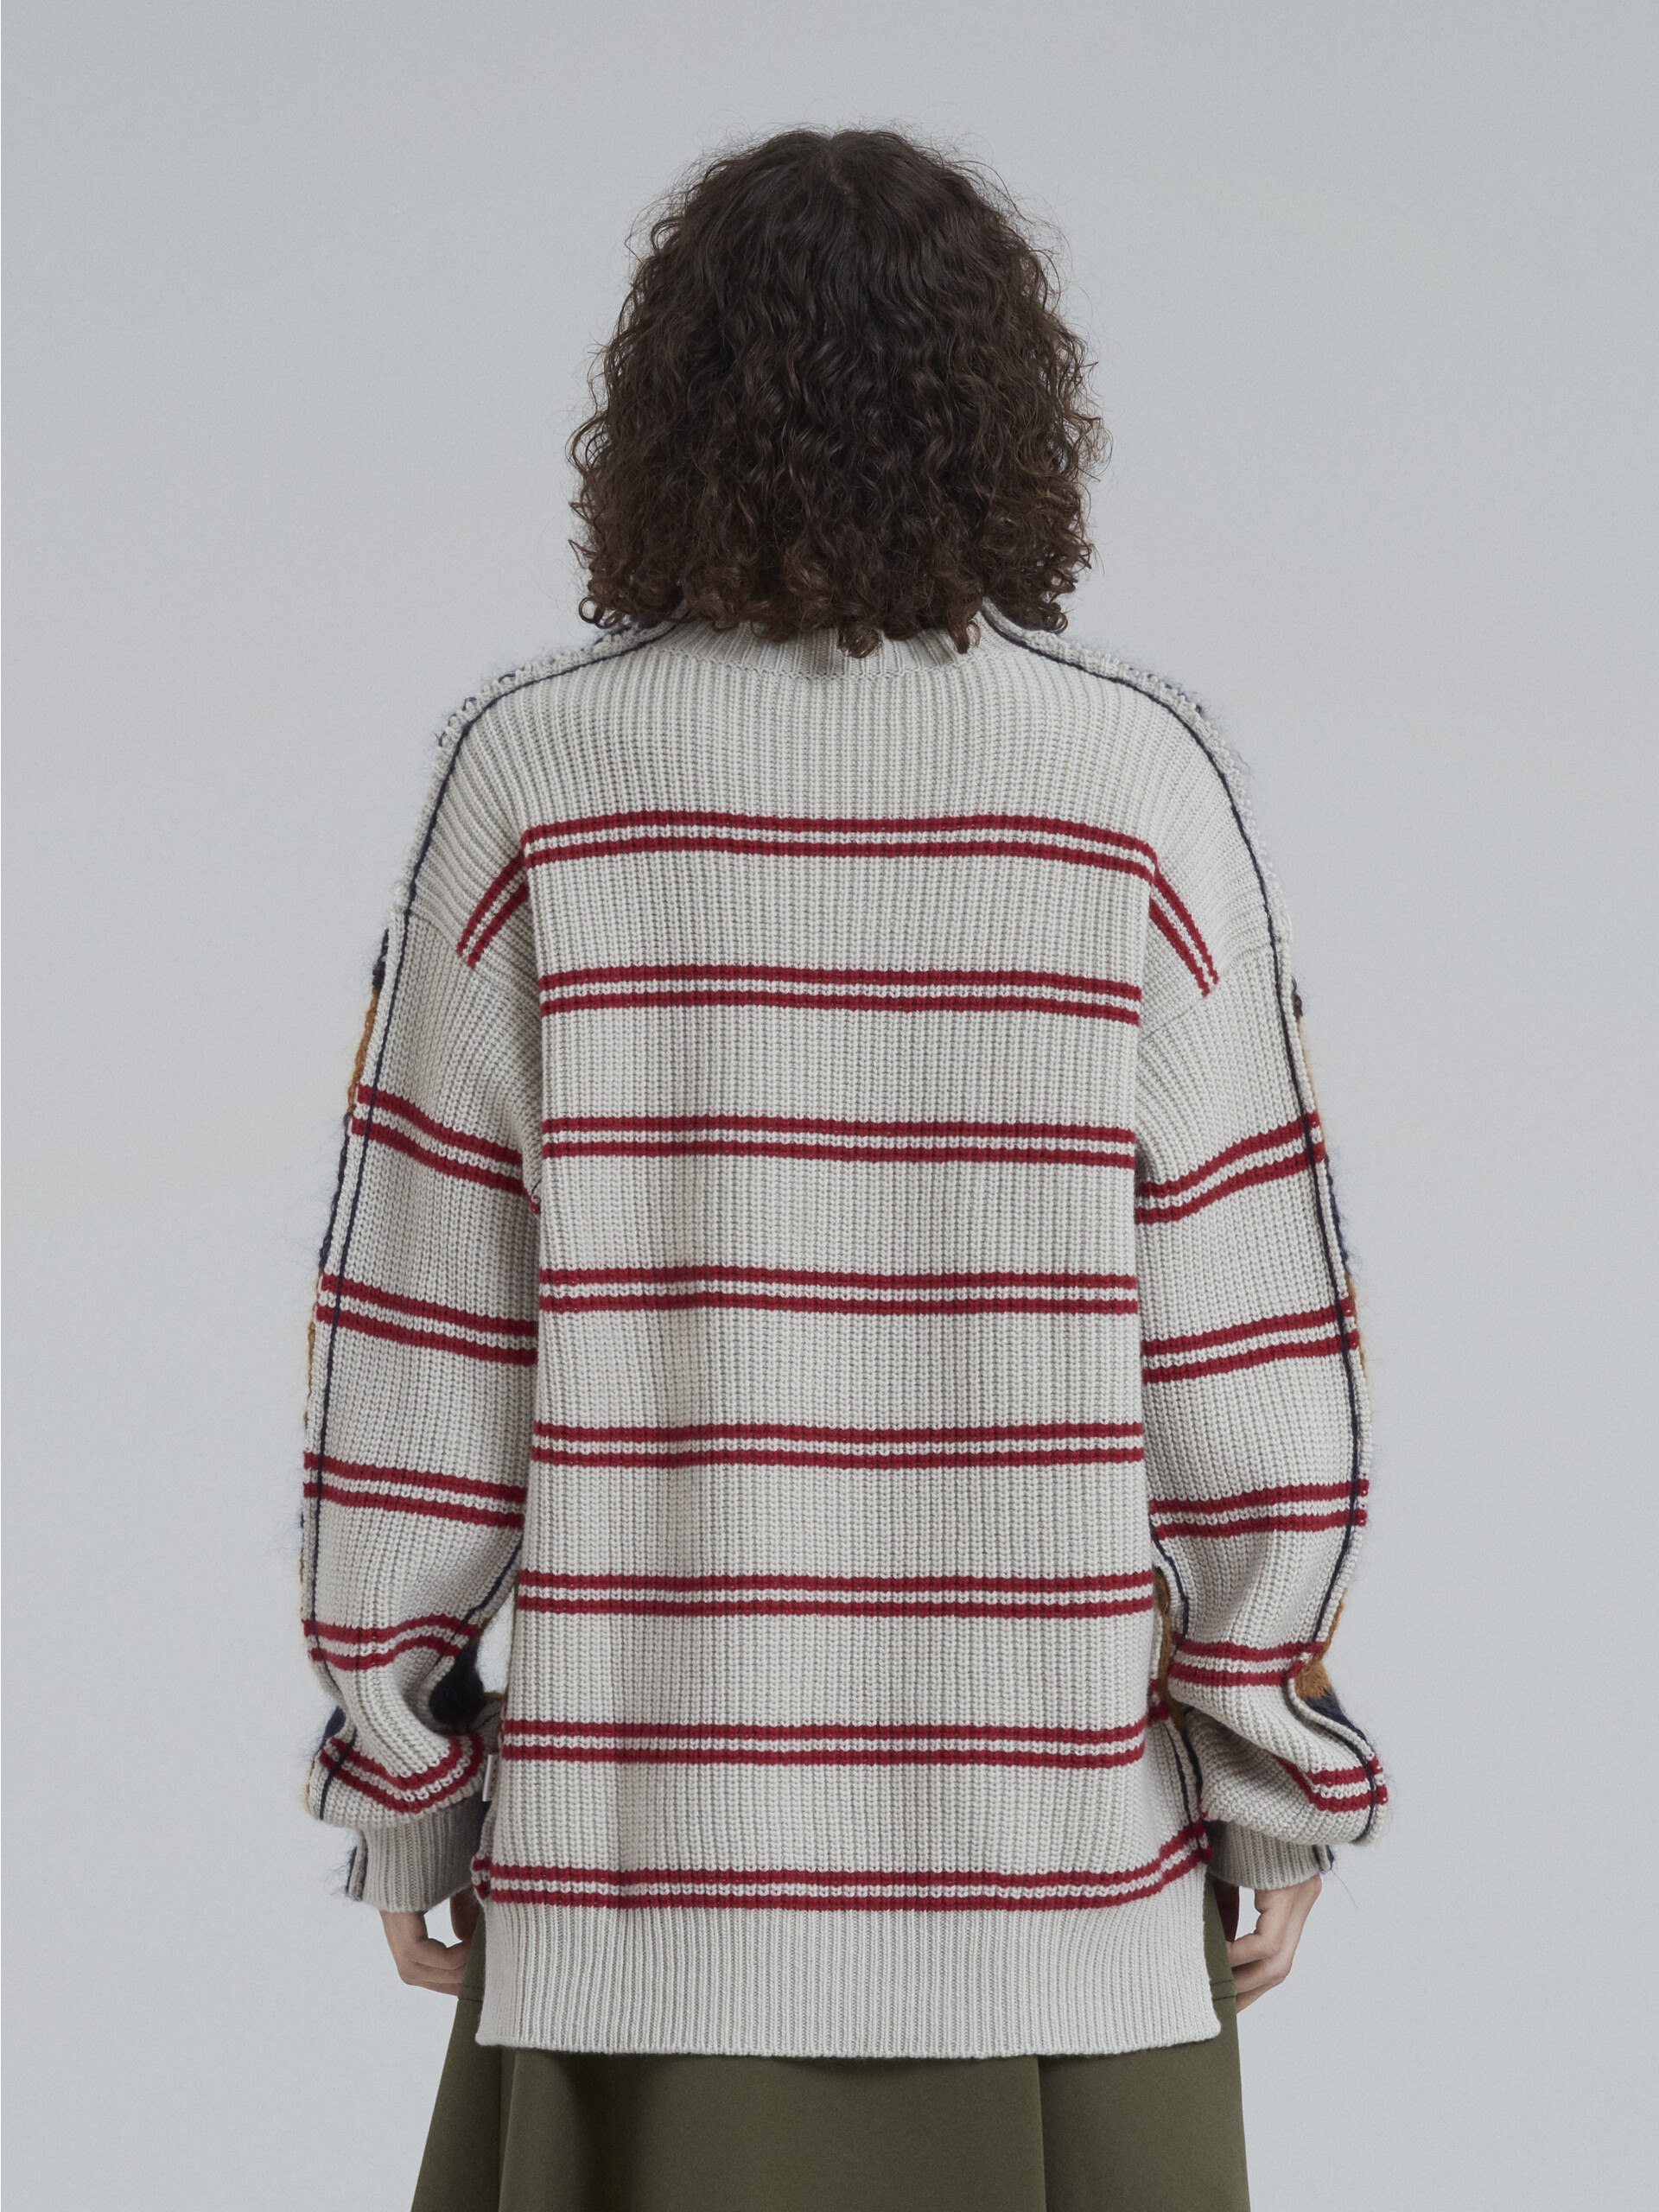 Wool and mohair sweater with raw-edged seams - Pullovers - Image 3